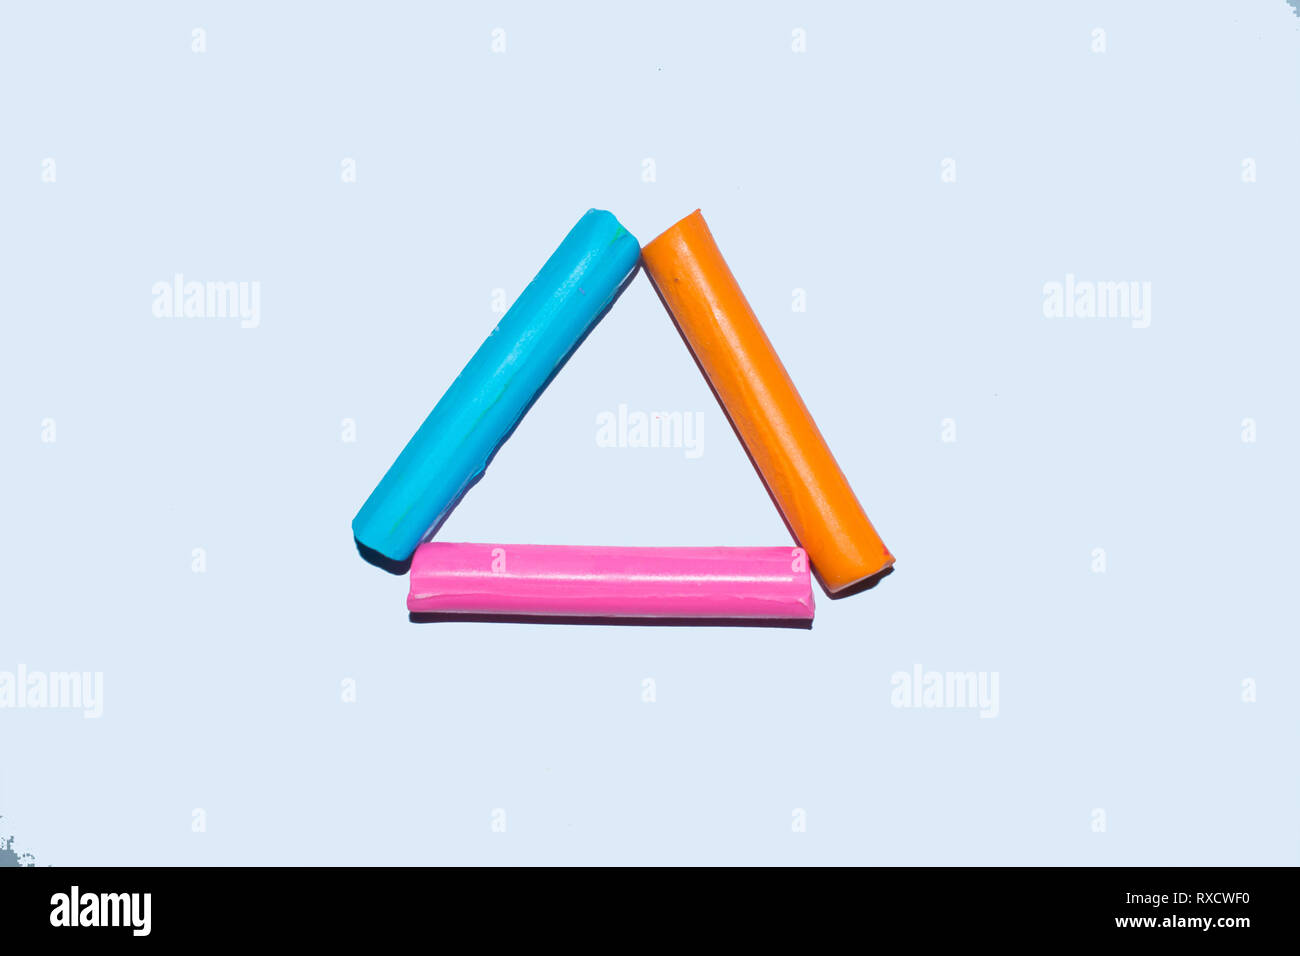 Colorful clay sticks forming a traingle shape on a white background Stock Photo